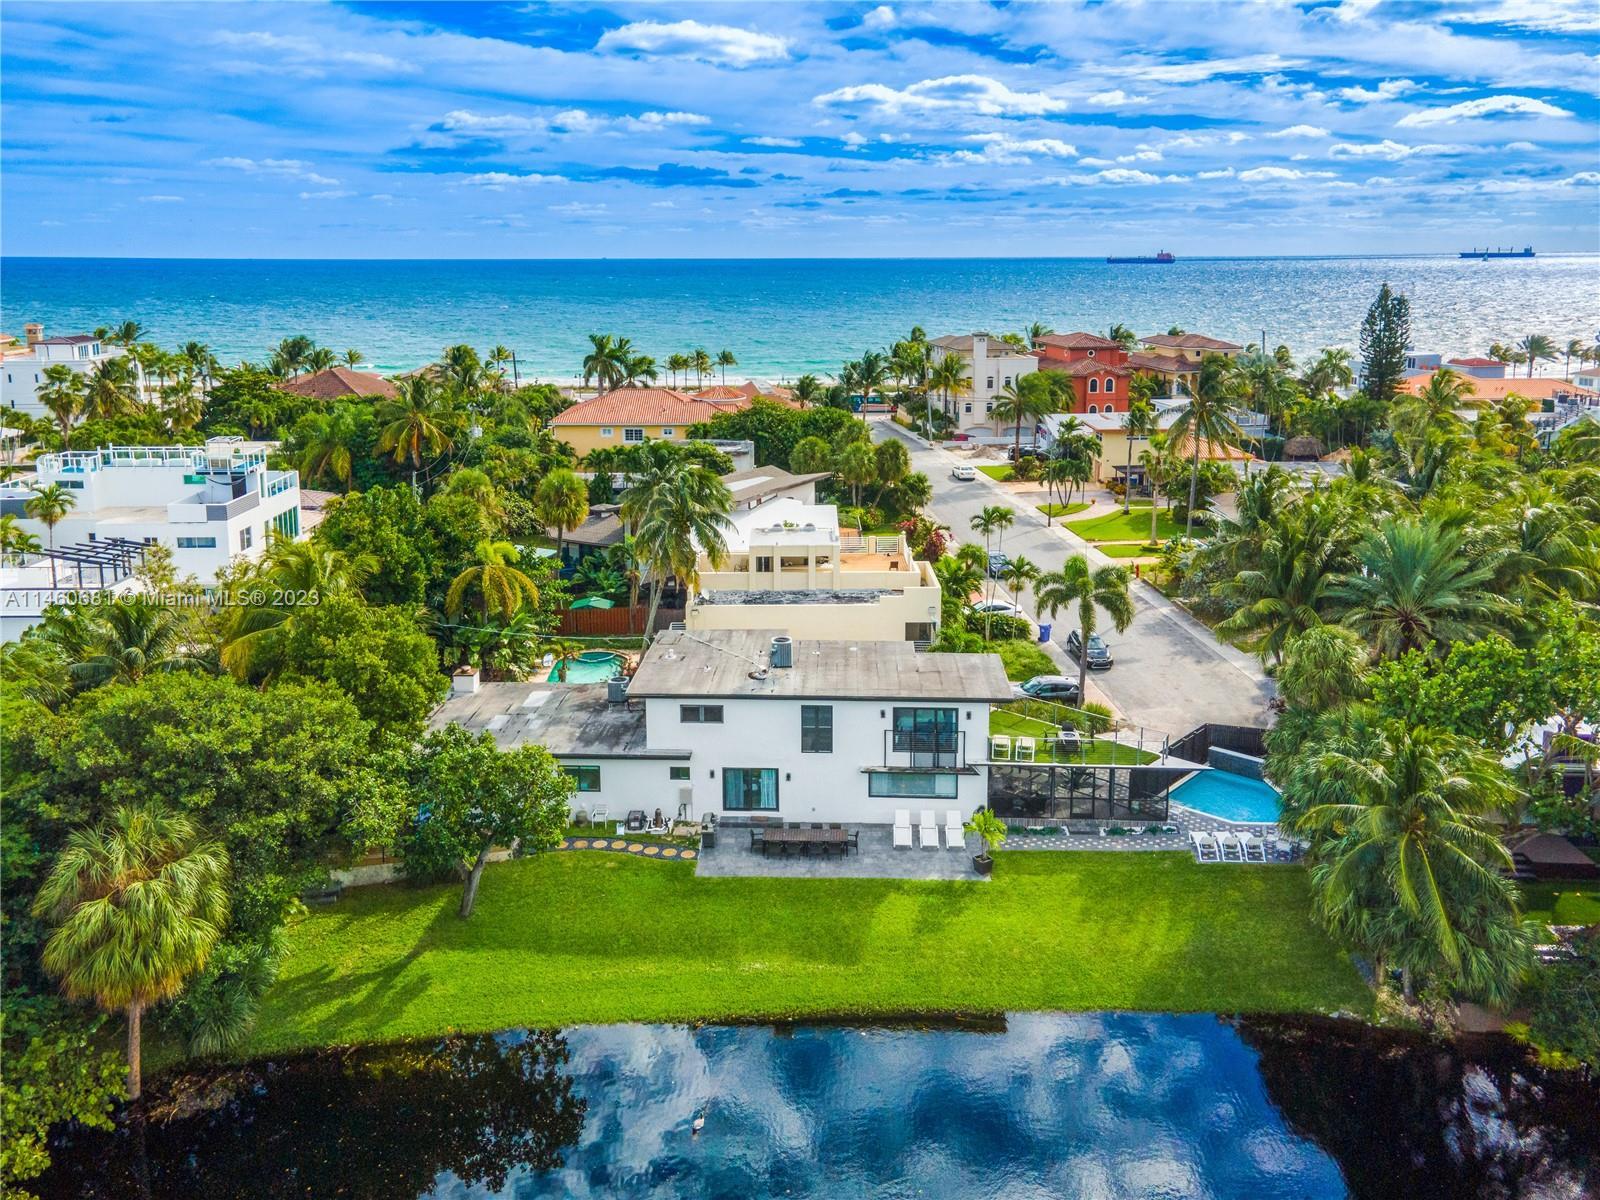 NESTLED IN THE HEART OF PARADISE, this exquisite two-story home offers an unrivaled coastal living e